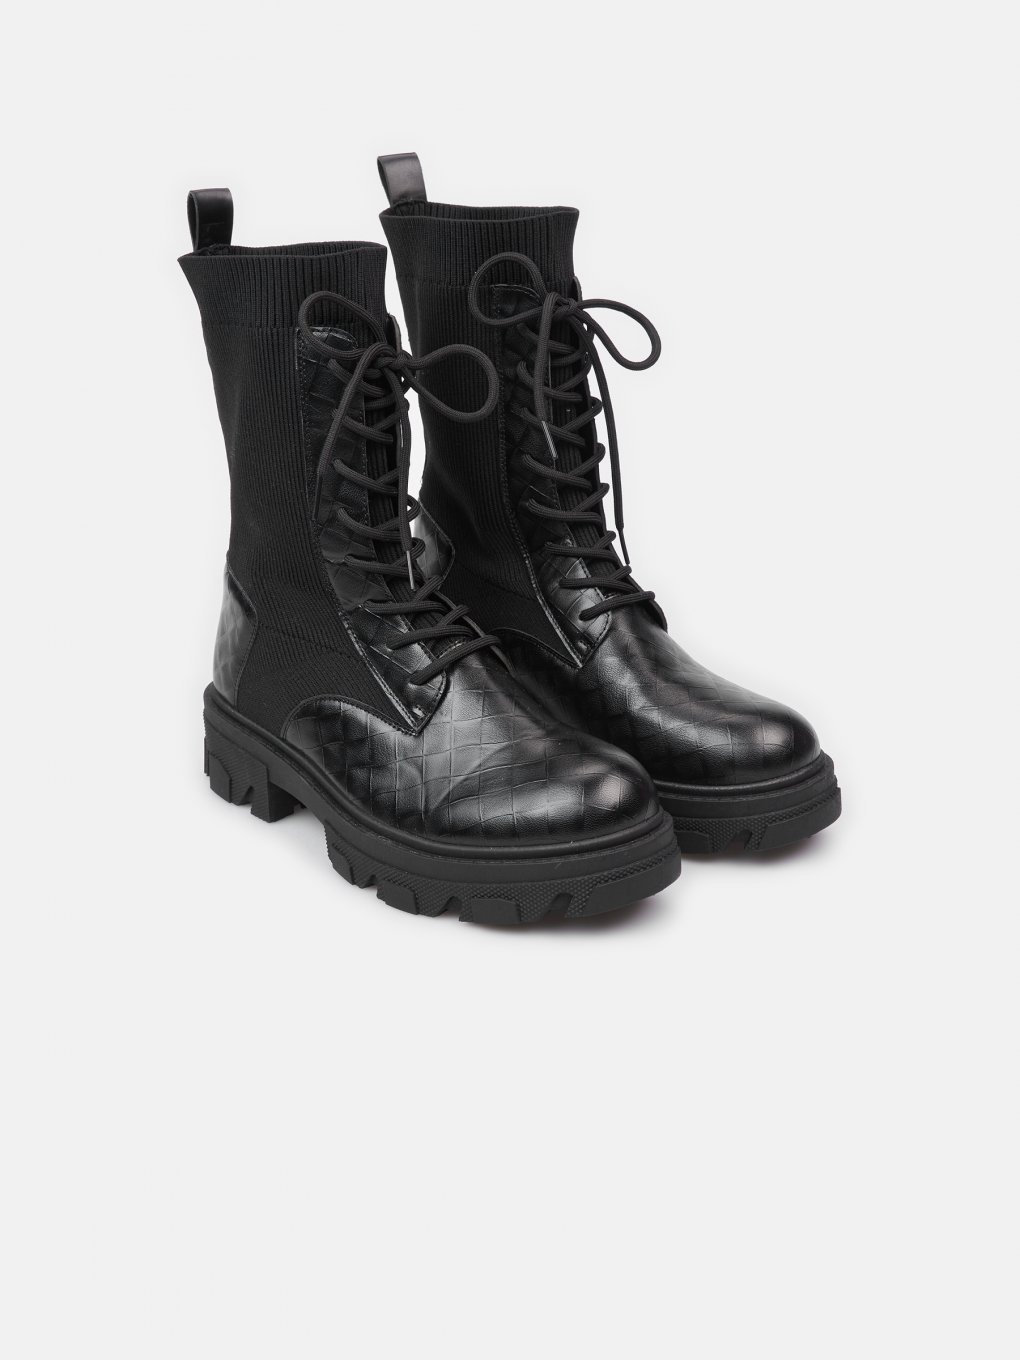 Combined lace up combat boots